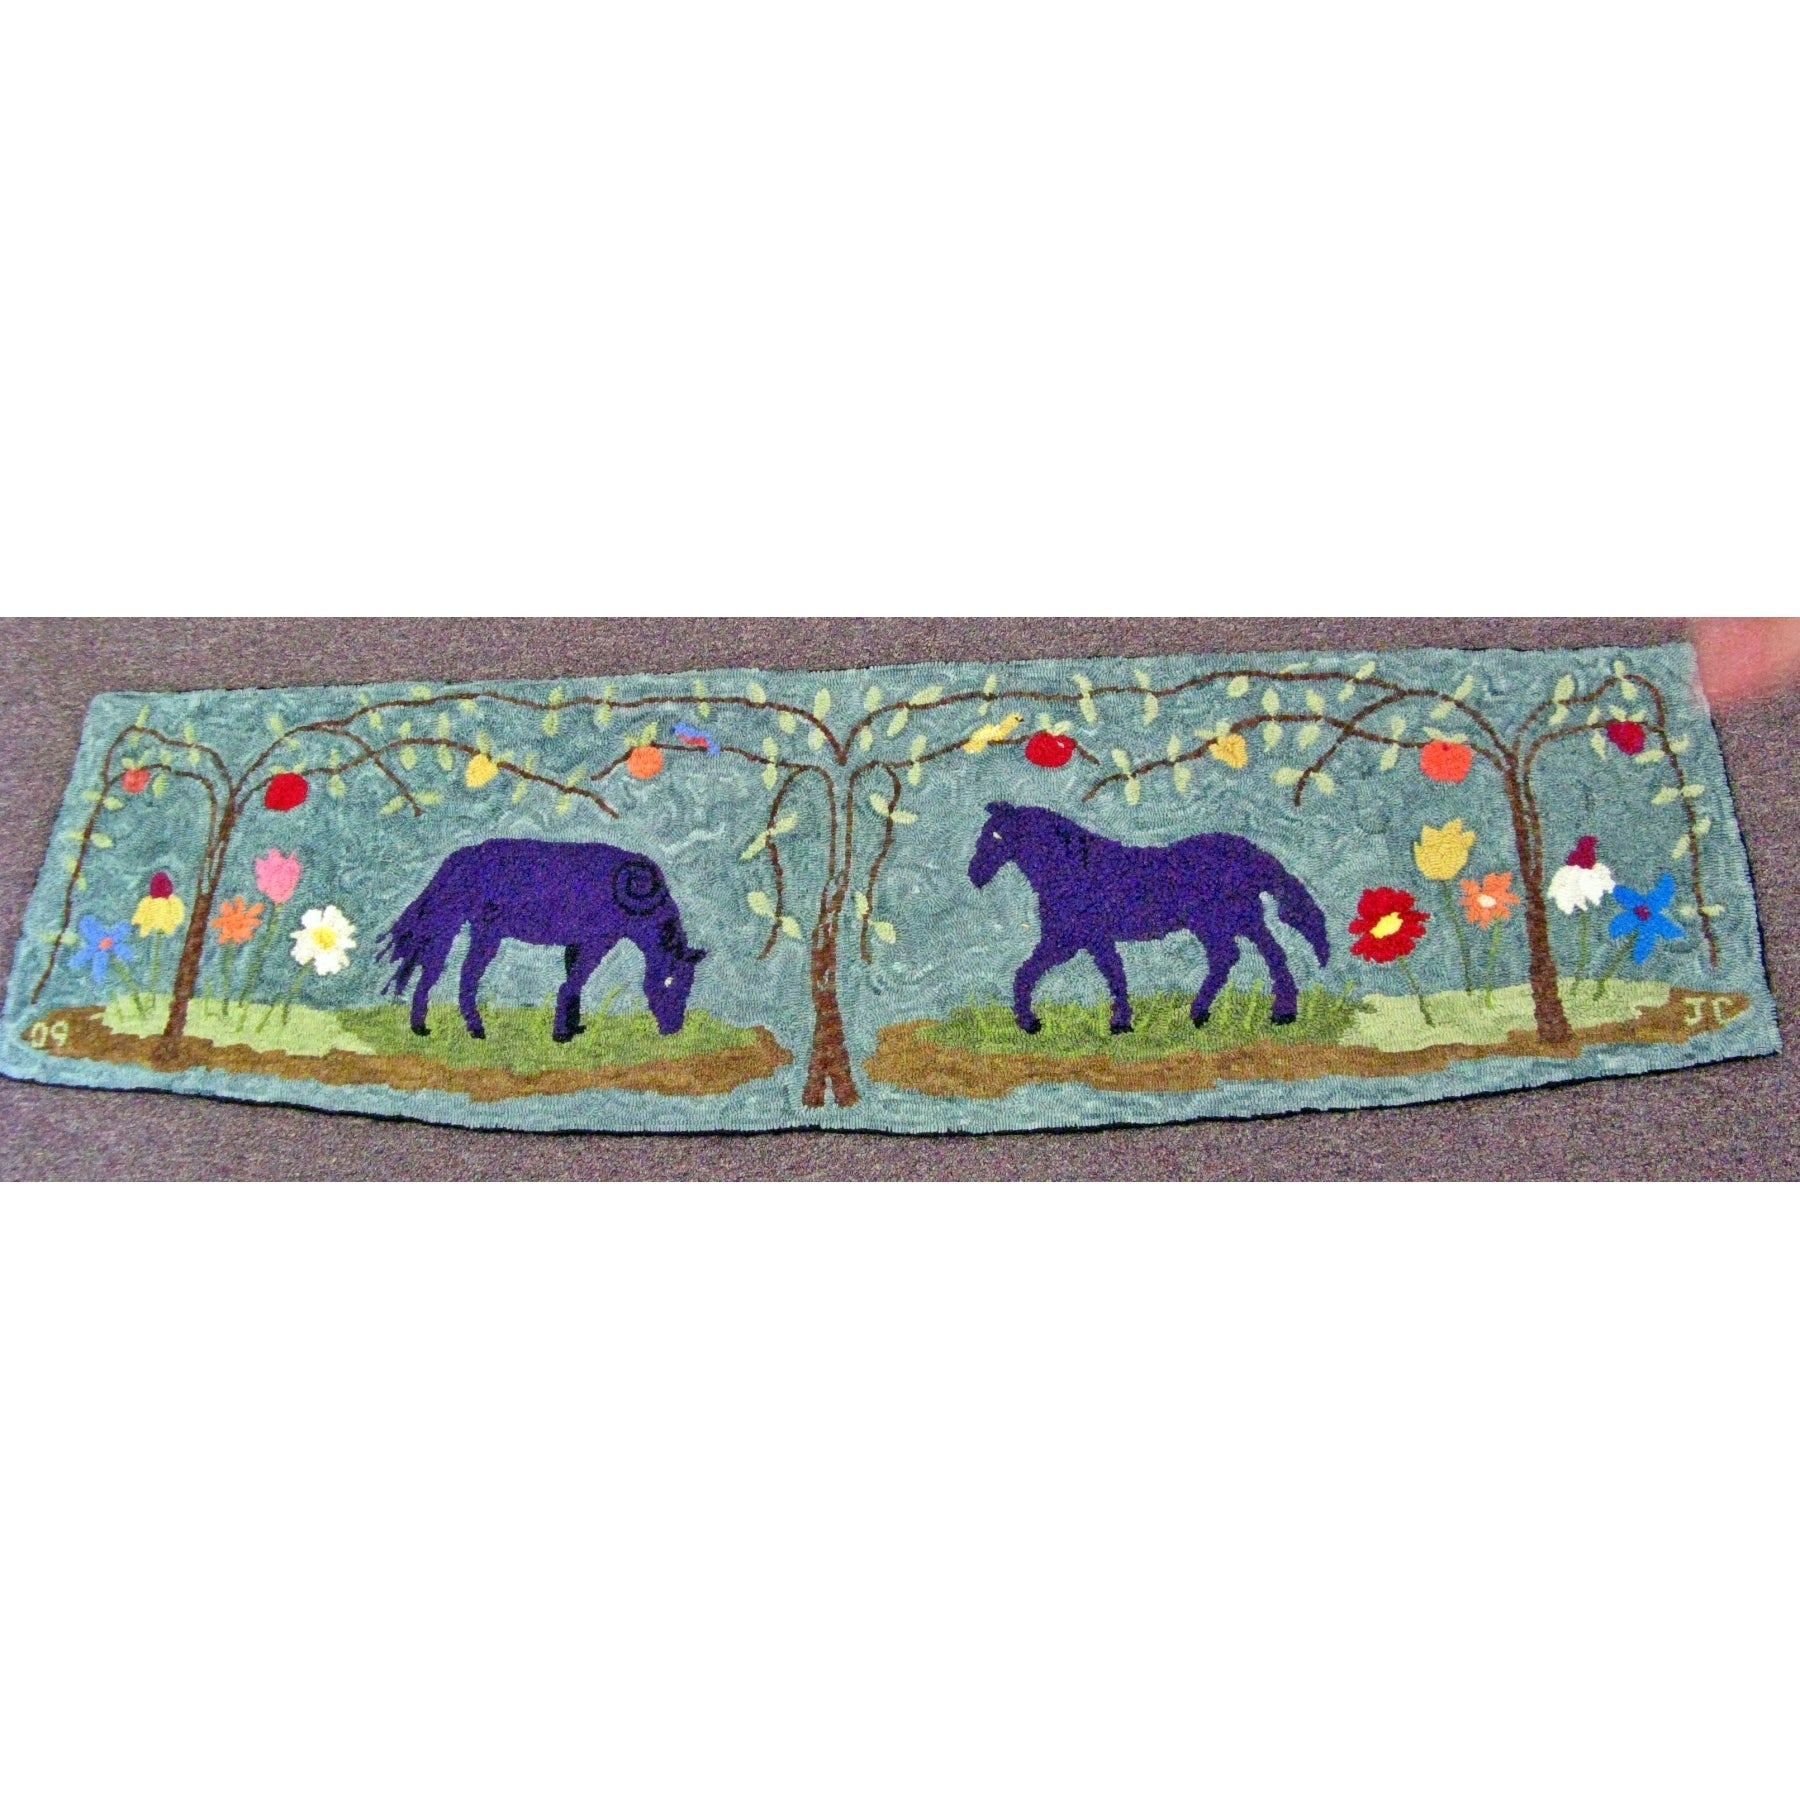 Two Horses, rug hooked by Janey Crum